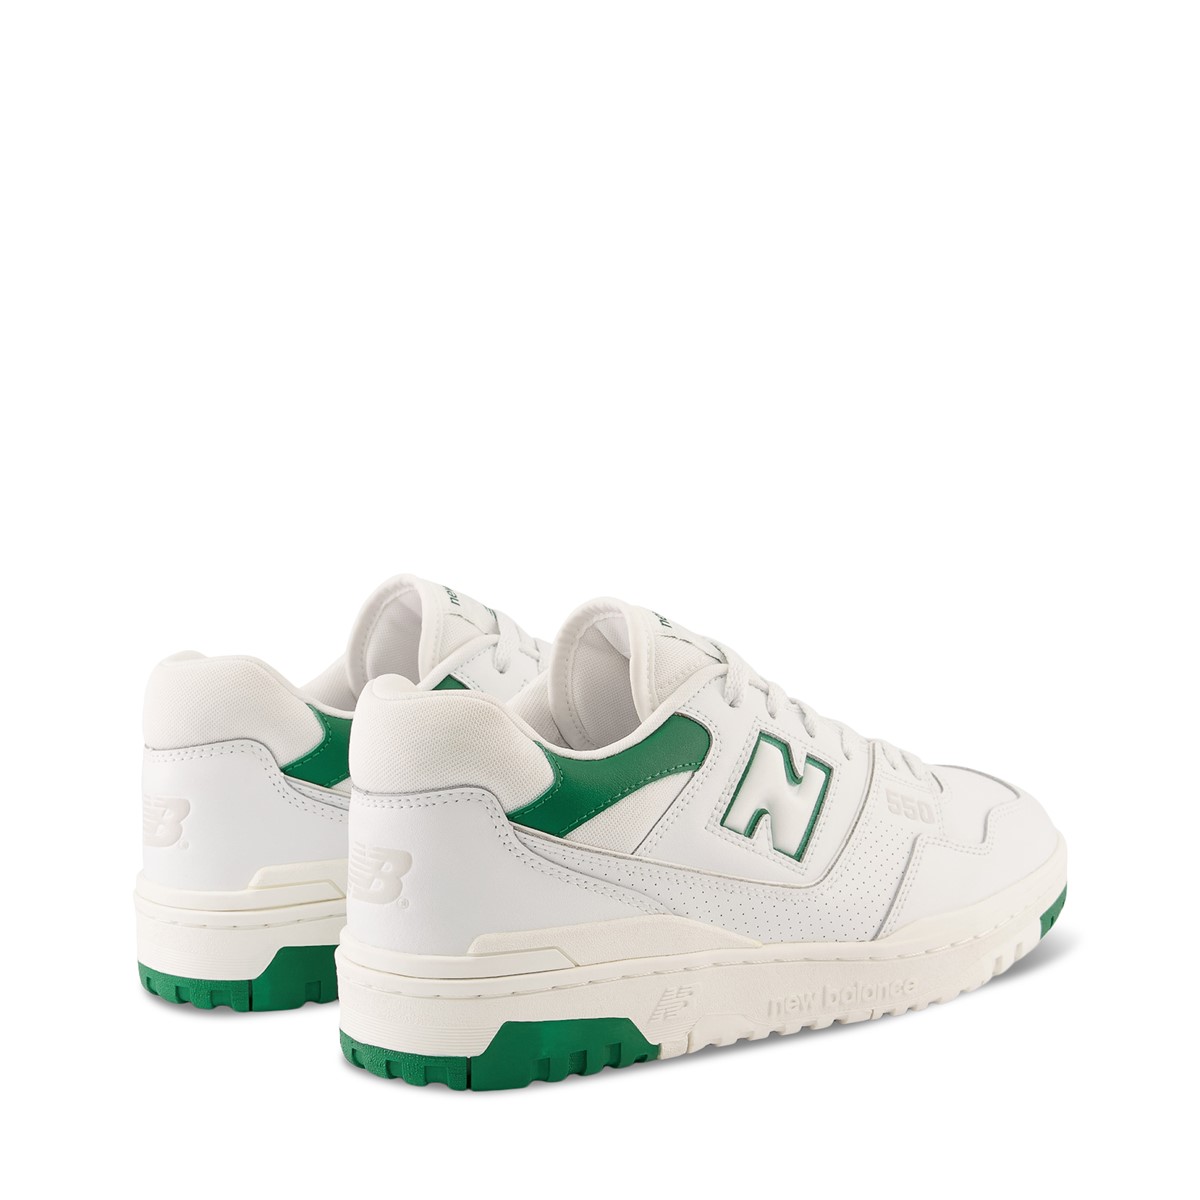 BB550 Sneakers in White/Green